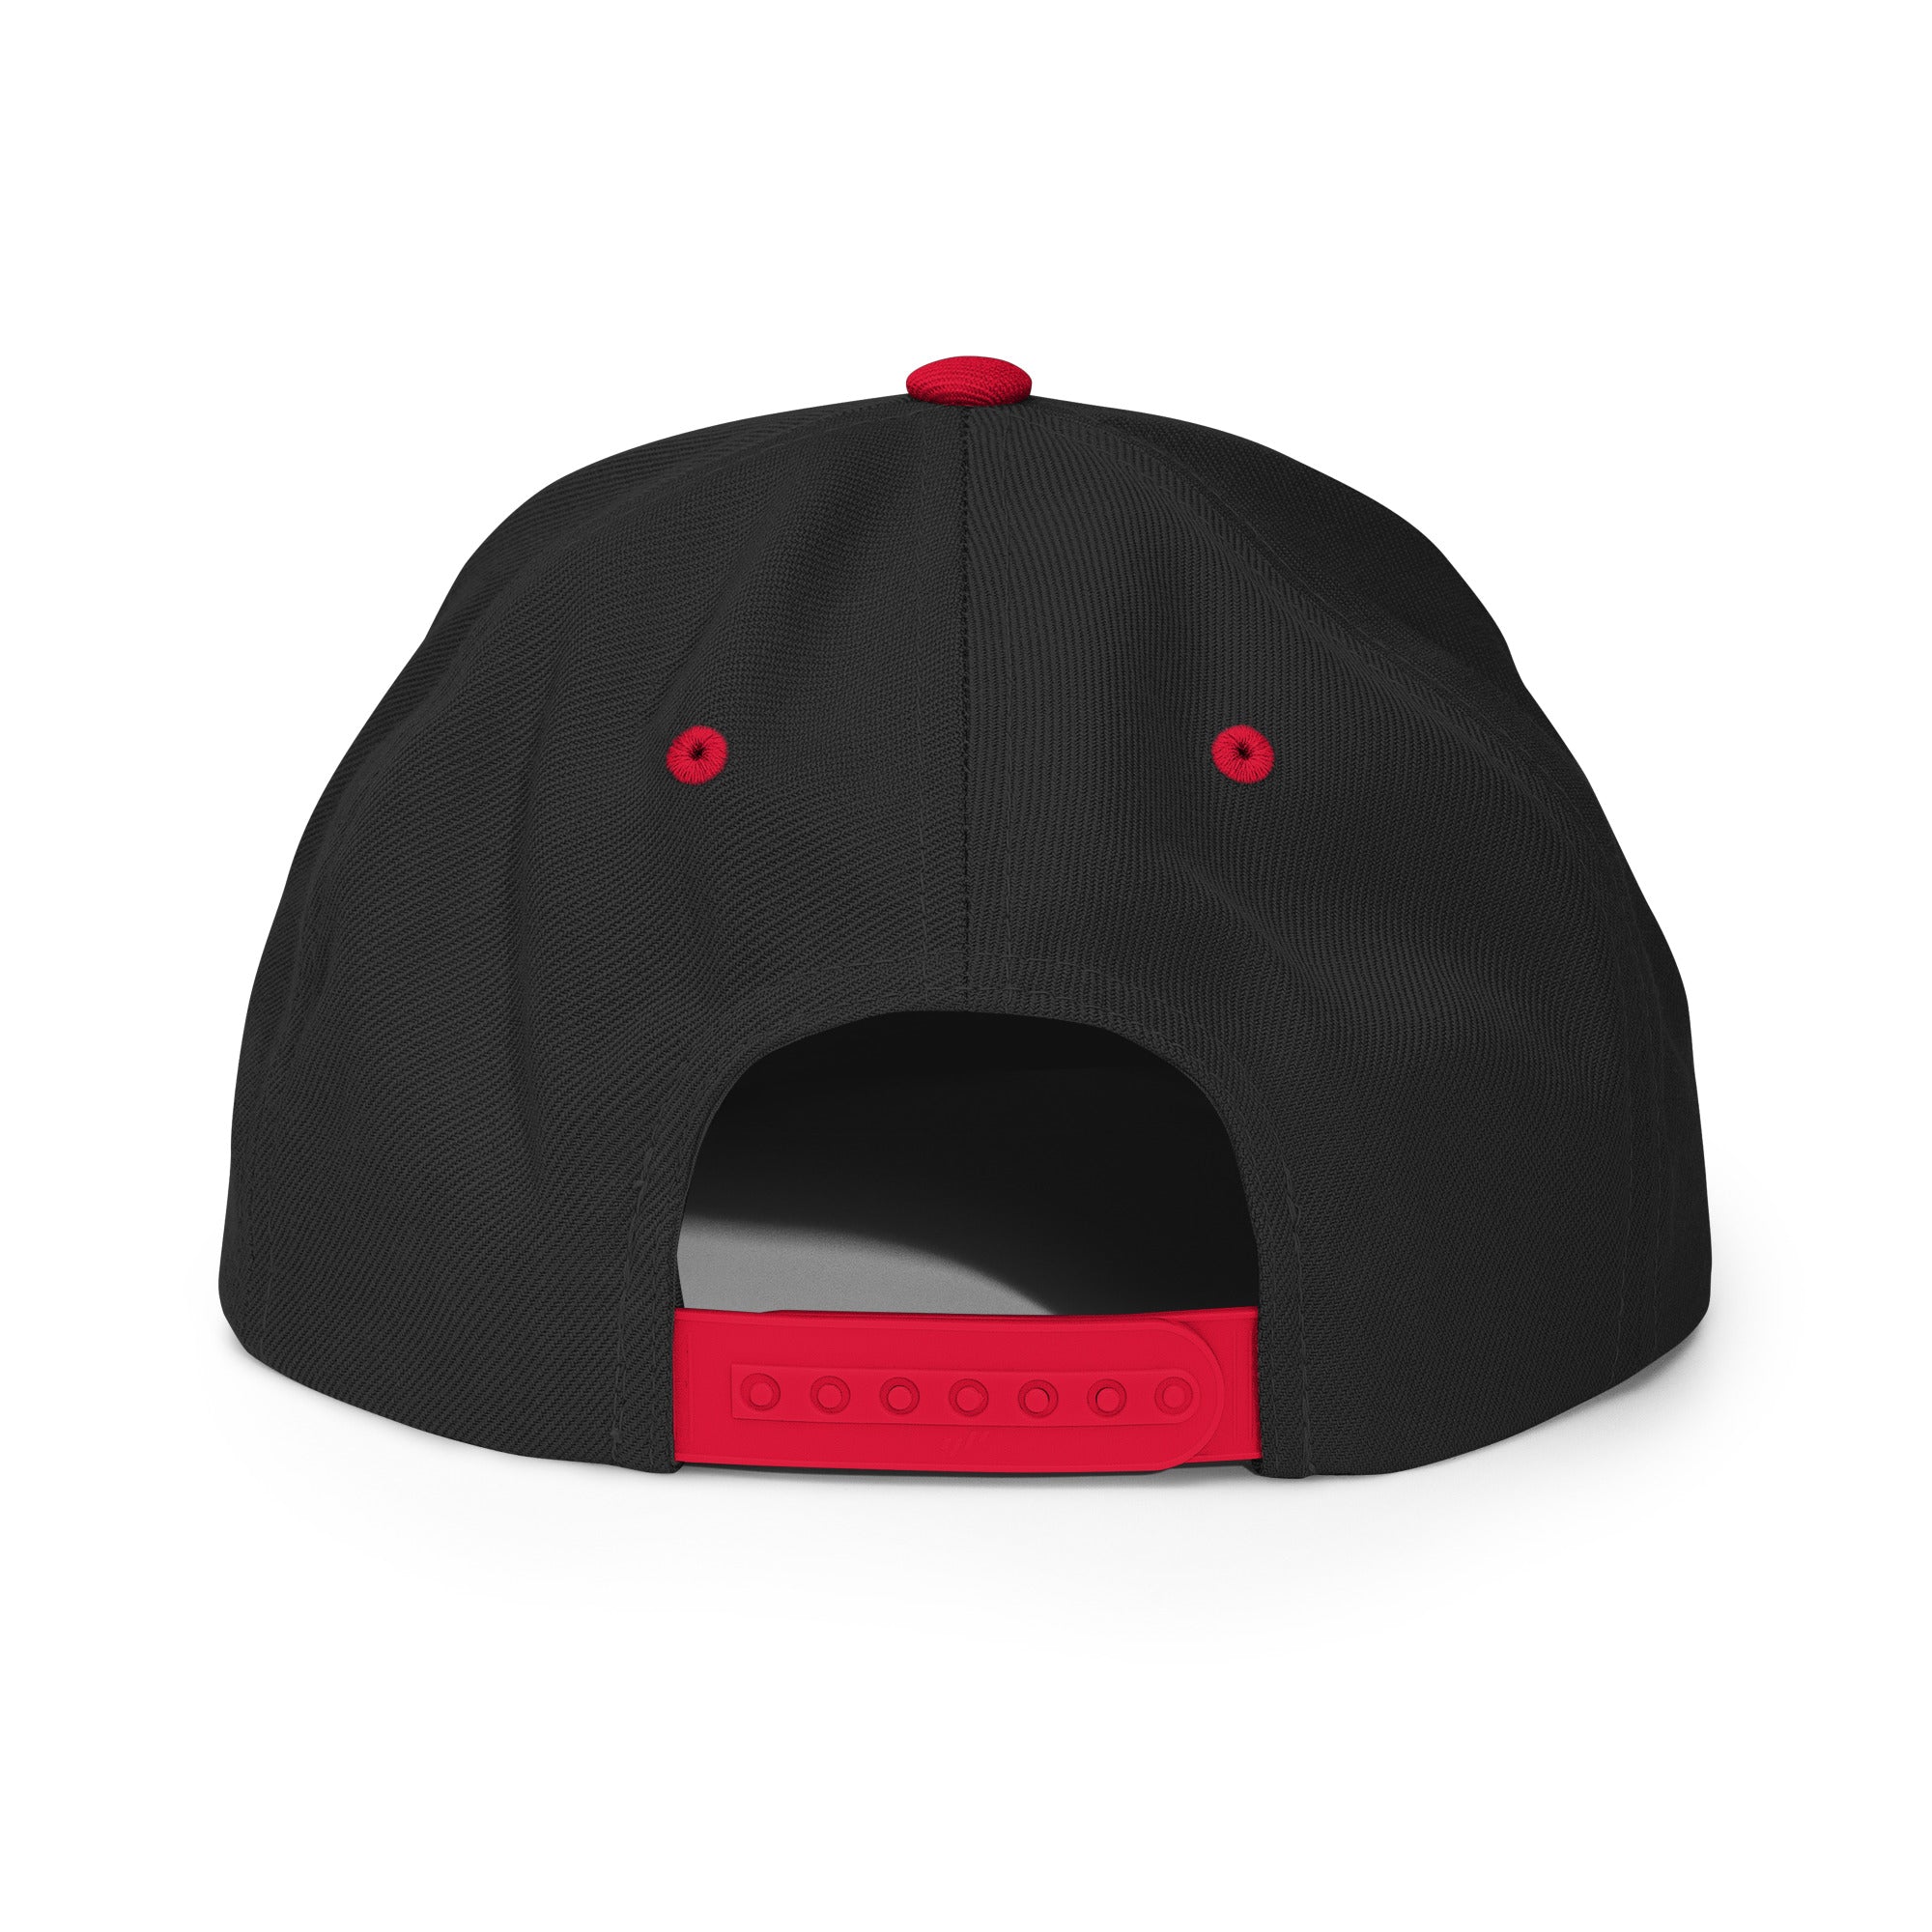 Red Heartbeat Classic Snapback Hat